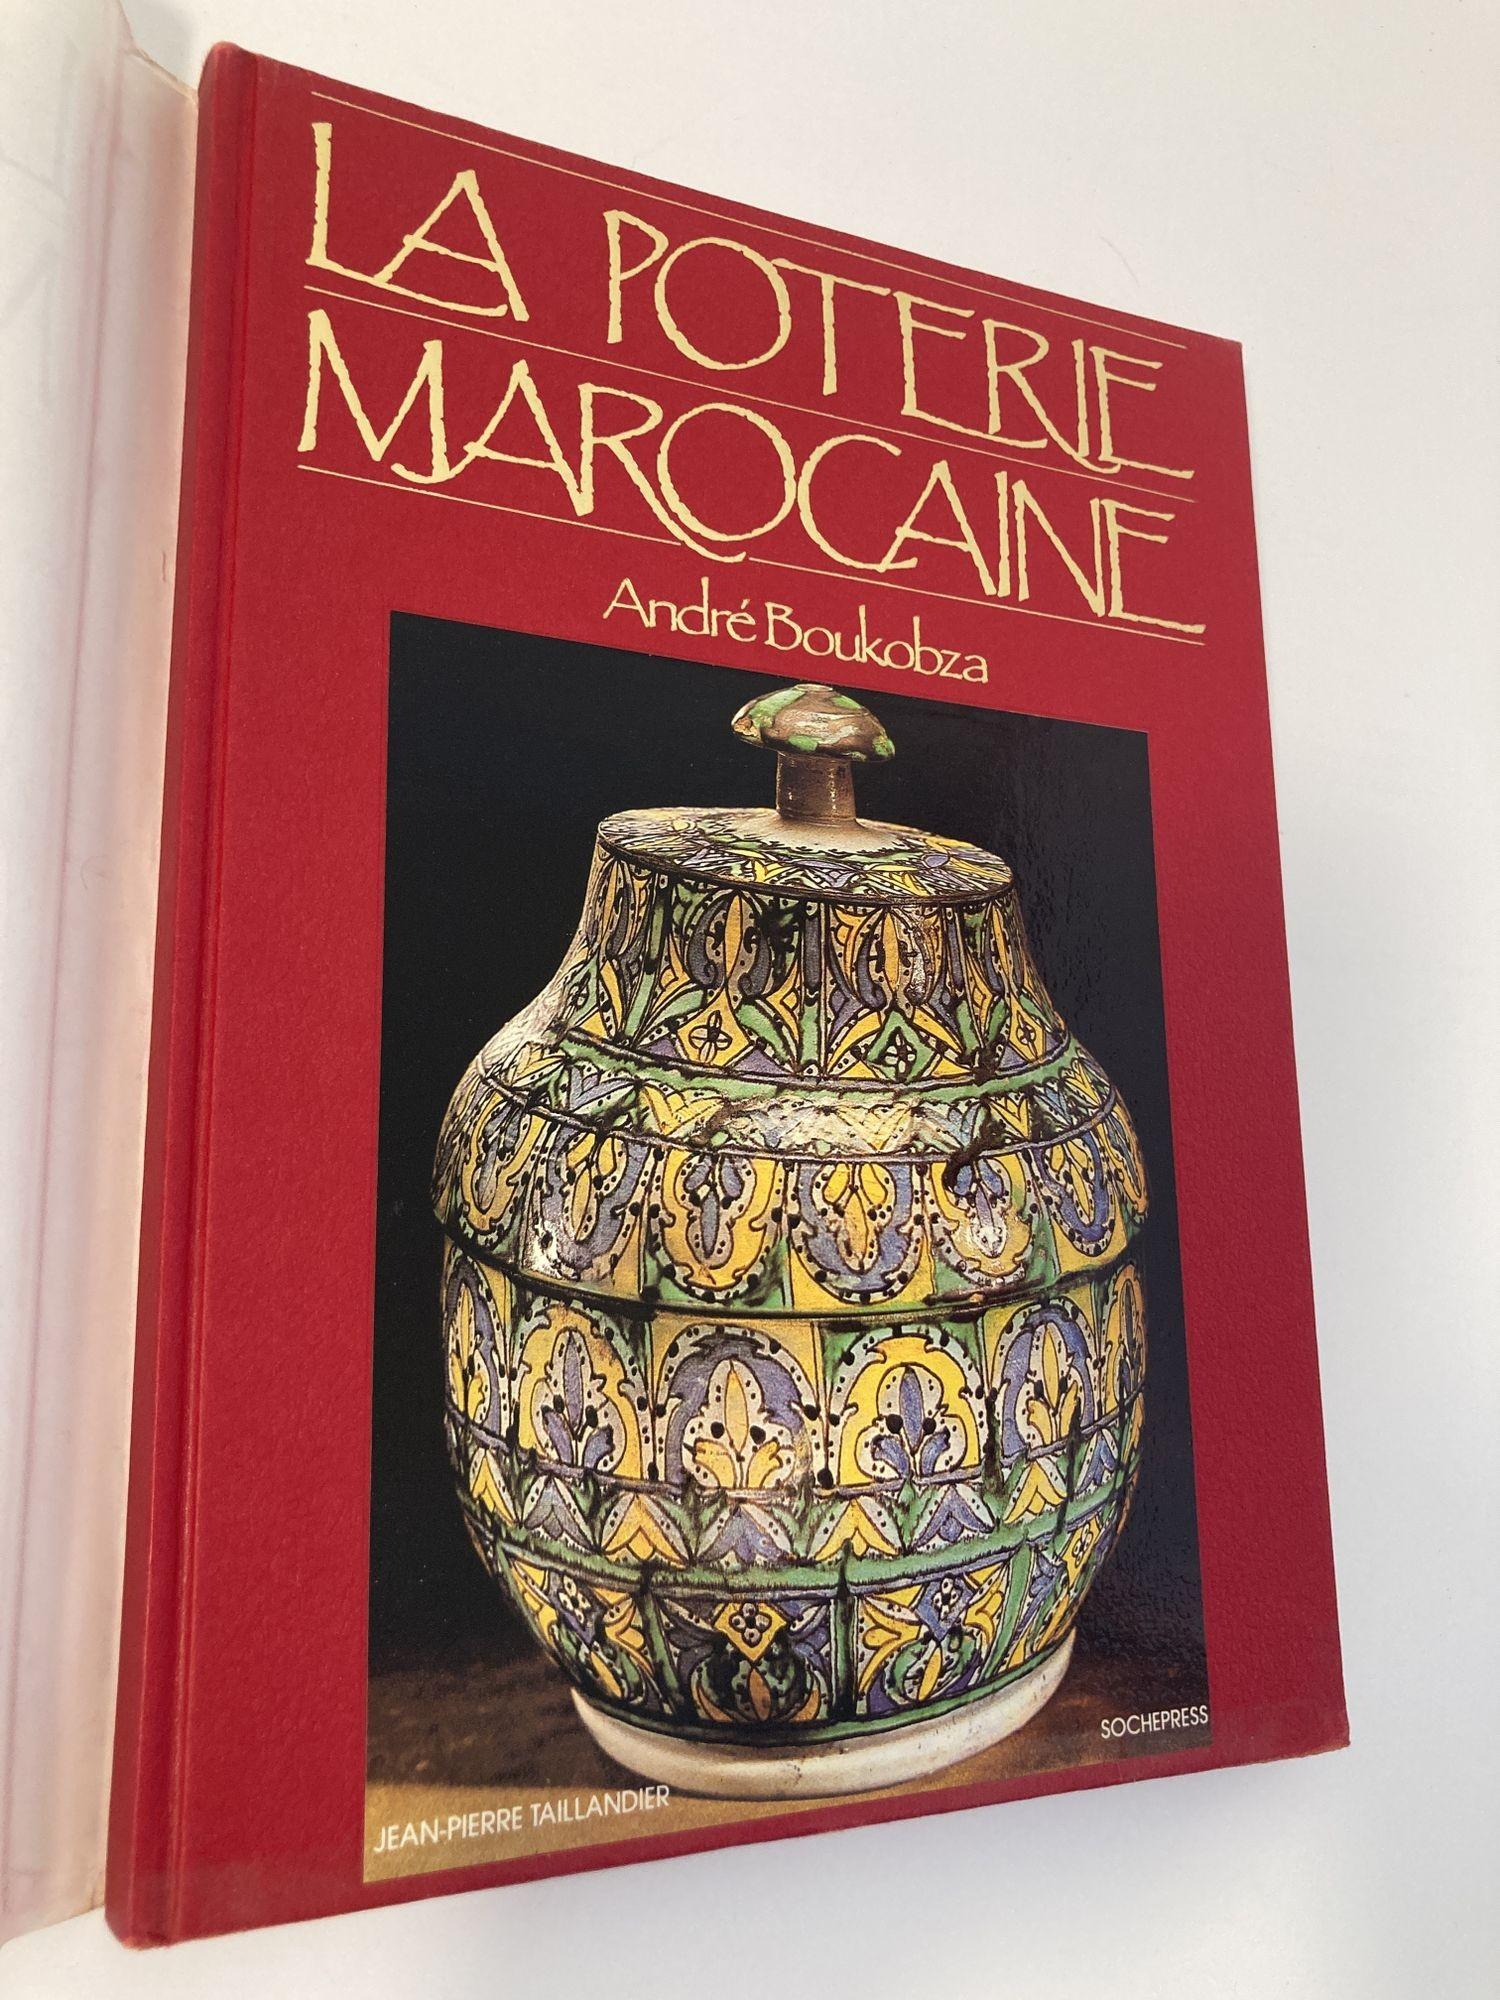 Moroccan Pottery La Poterie Marocaine by André Boukobza French Edition Hard For Sale 1